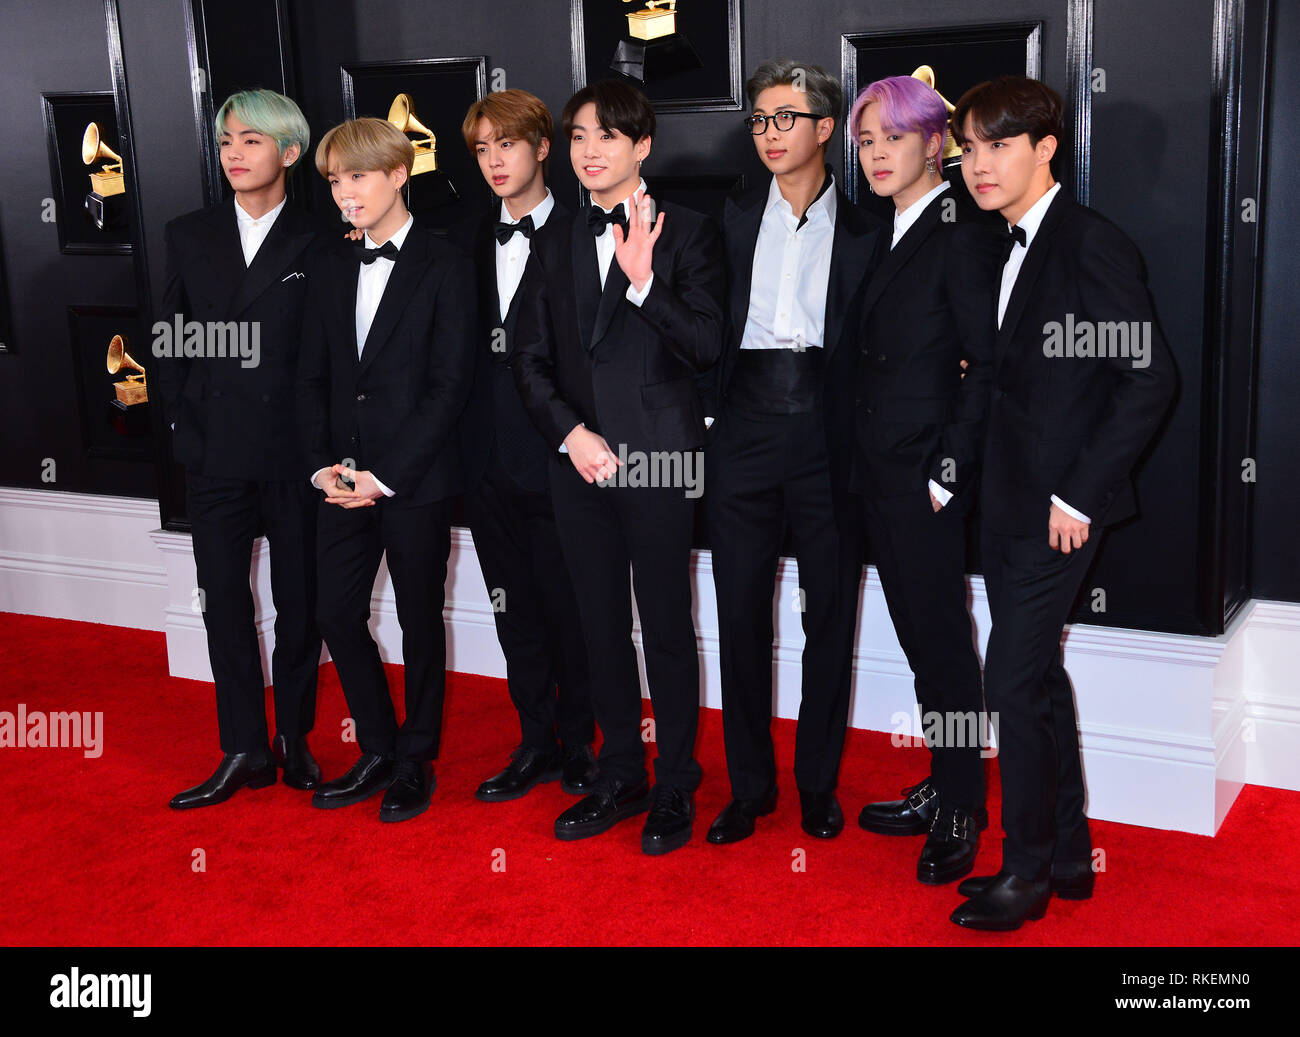 61st Annual Grammy Awards 2019 Arrivals held at the Staples Center in Los  Angeles, California. Featuring: RM, Jimin of Korean boy band 'BTS' Where:  Los Angeles, California, United States When: 10 Feb